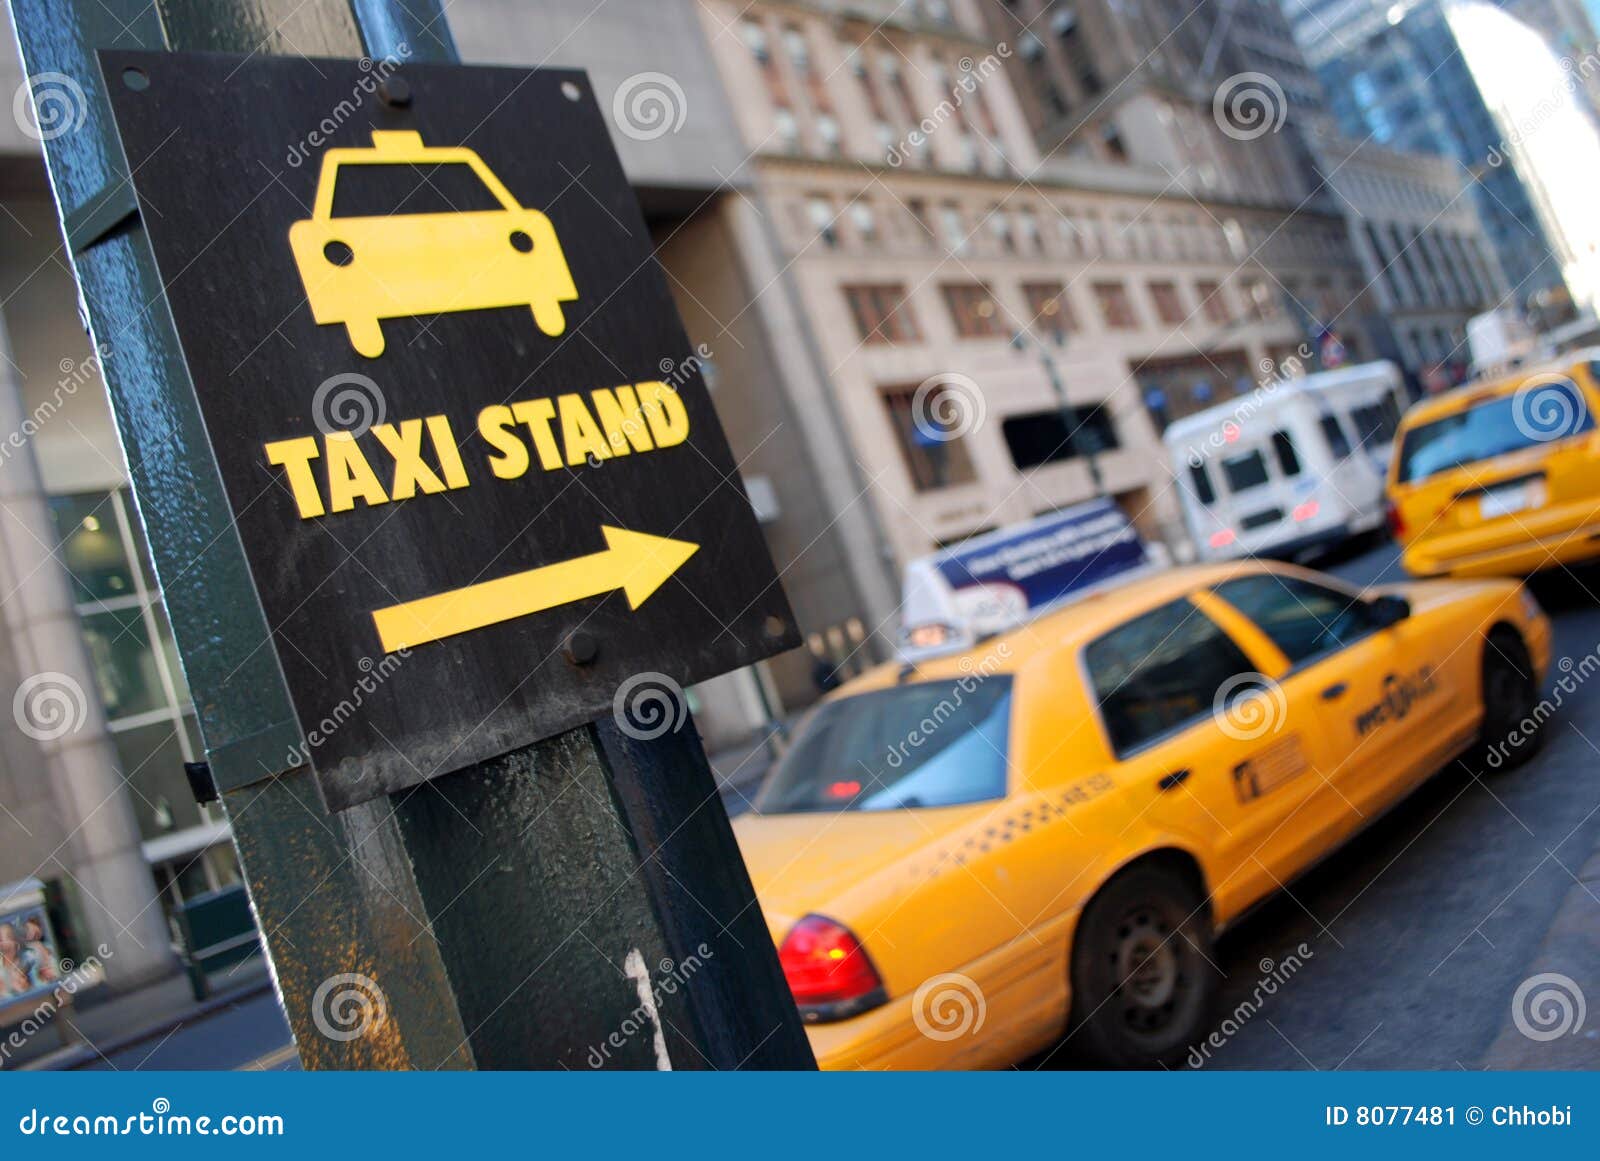 new york taxi stand